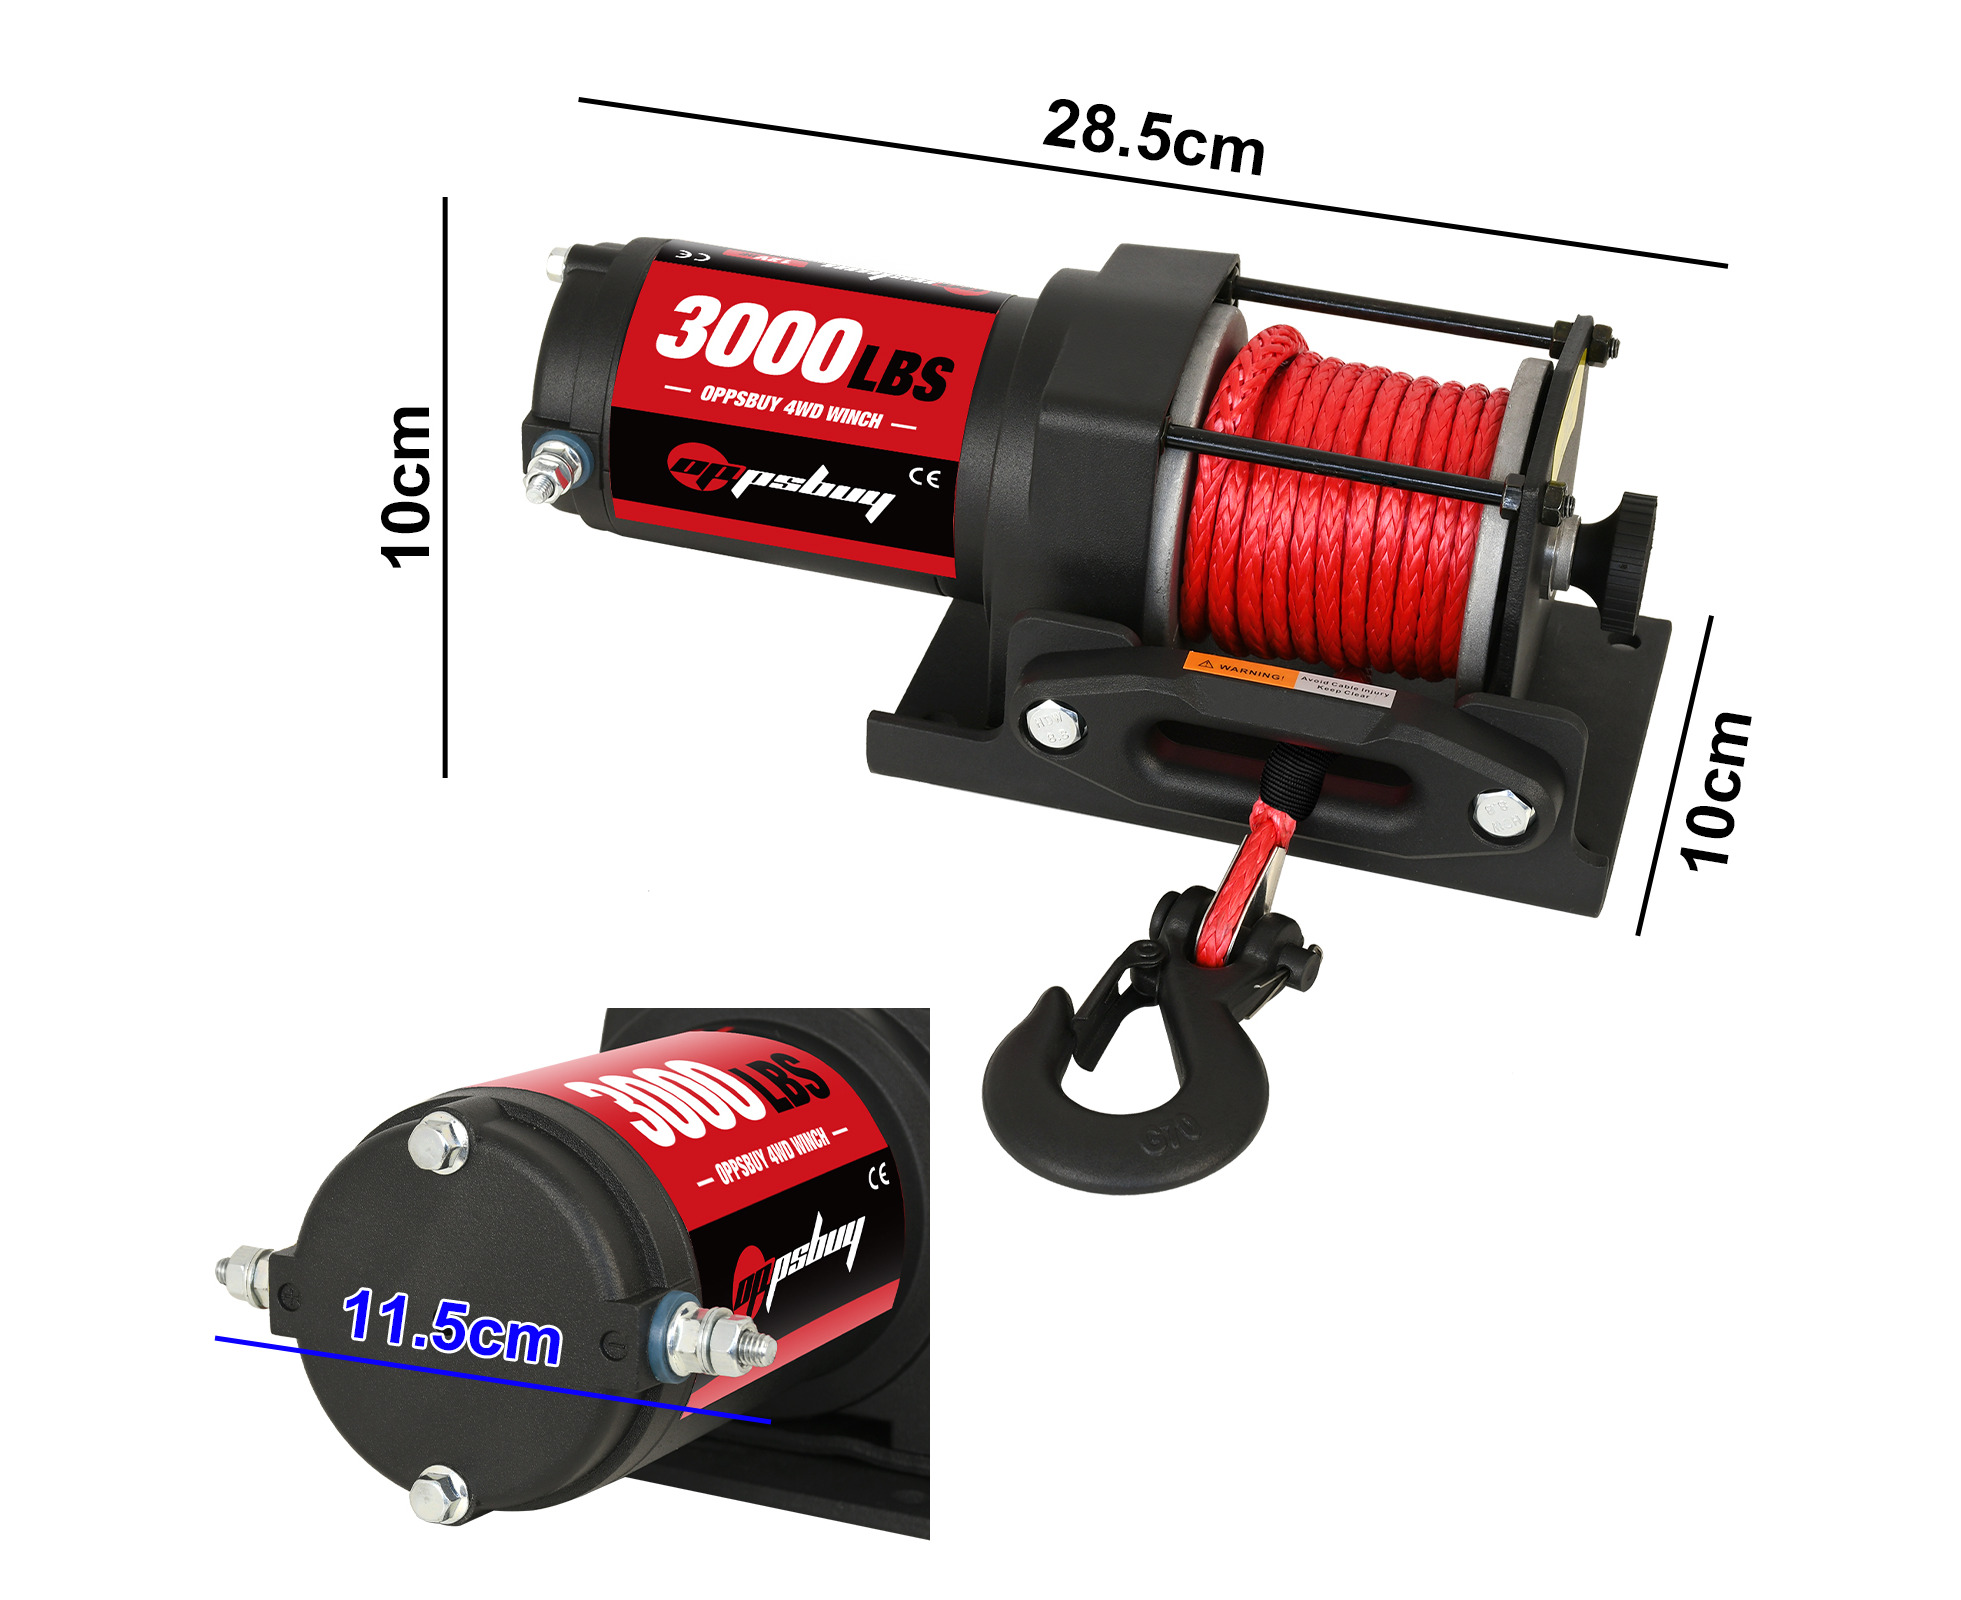  XPV AUTO 3000 lb 12V DC Electric Winch, Off Road Waterproof  Winch for UTV ATV Boat with Both Wireless Handheld Remote and Corded  Control Recovery Winch Synthetic Rope : Industrial 